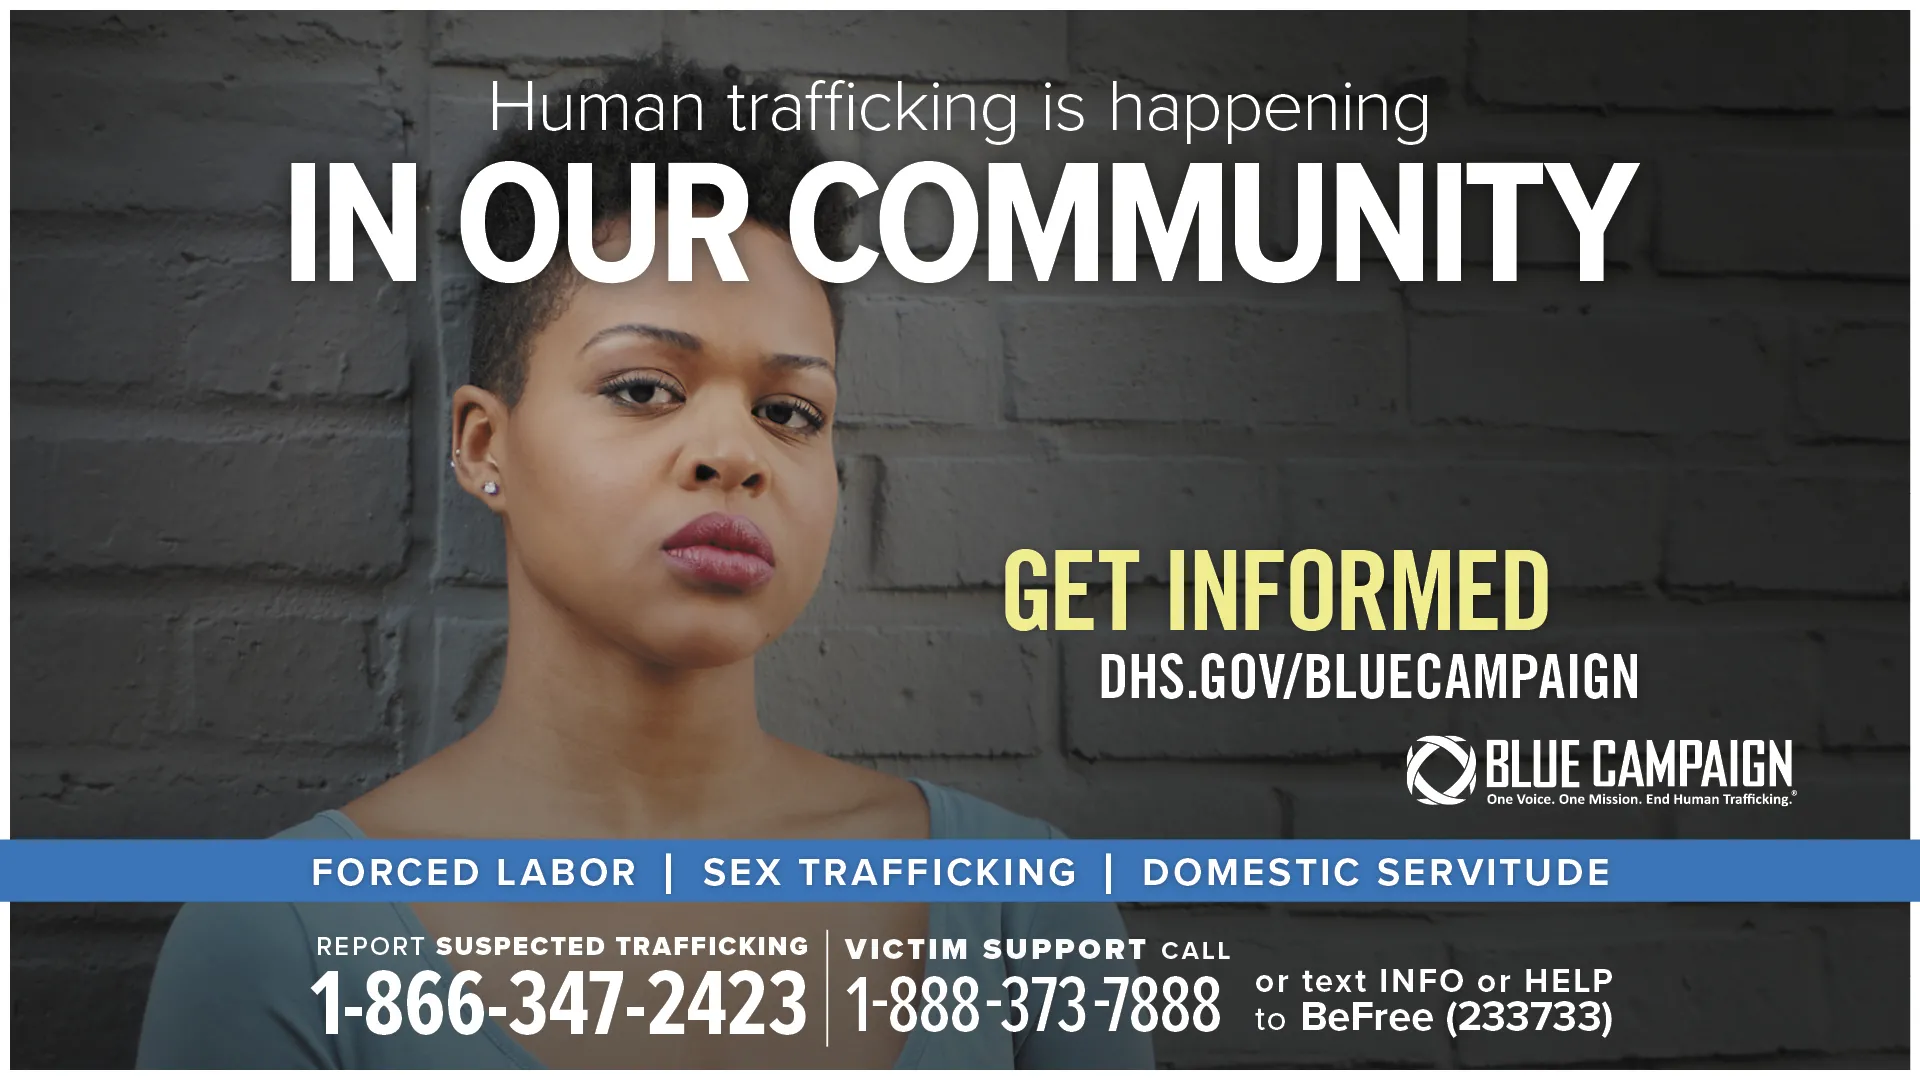 This poster shows a young African American woman in front of a brick wall looking directly into the camera with a neutral expression with the text “Human trafficking is happening in our community. Get informed. DHS.gov/BlueCampaign. Forced Labor, Sex Trafficking, Domestic Servitude. Report suspected trafficking: 1-866-347-2423. Victim support call: 1-888-373-7888 or text INFO or HELP to BeFree (233733).”